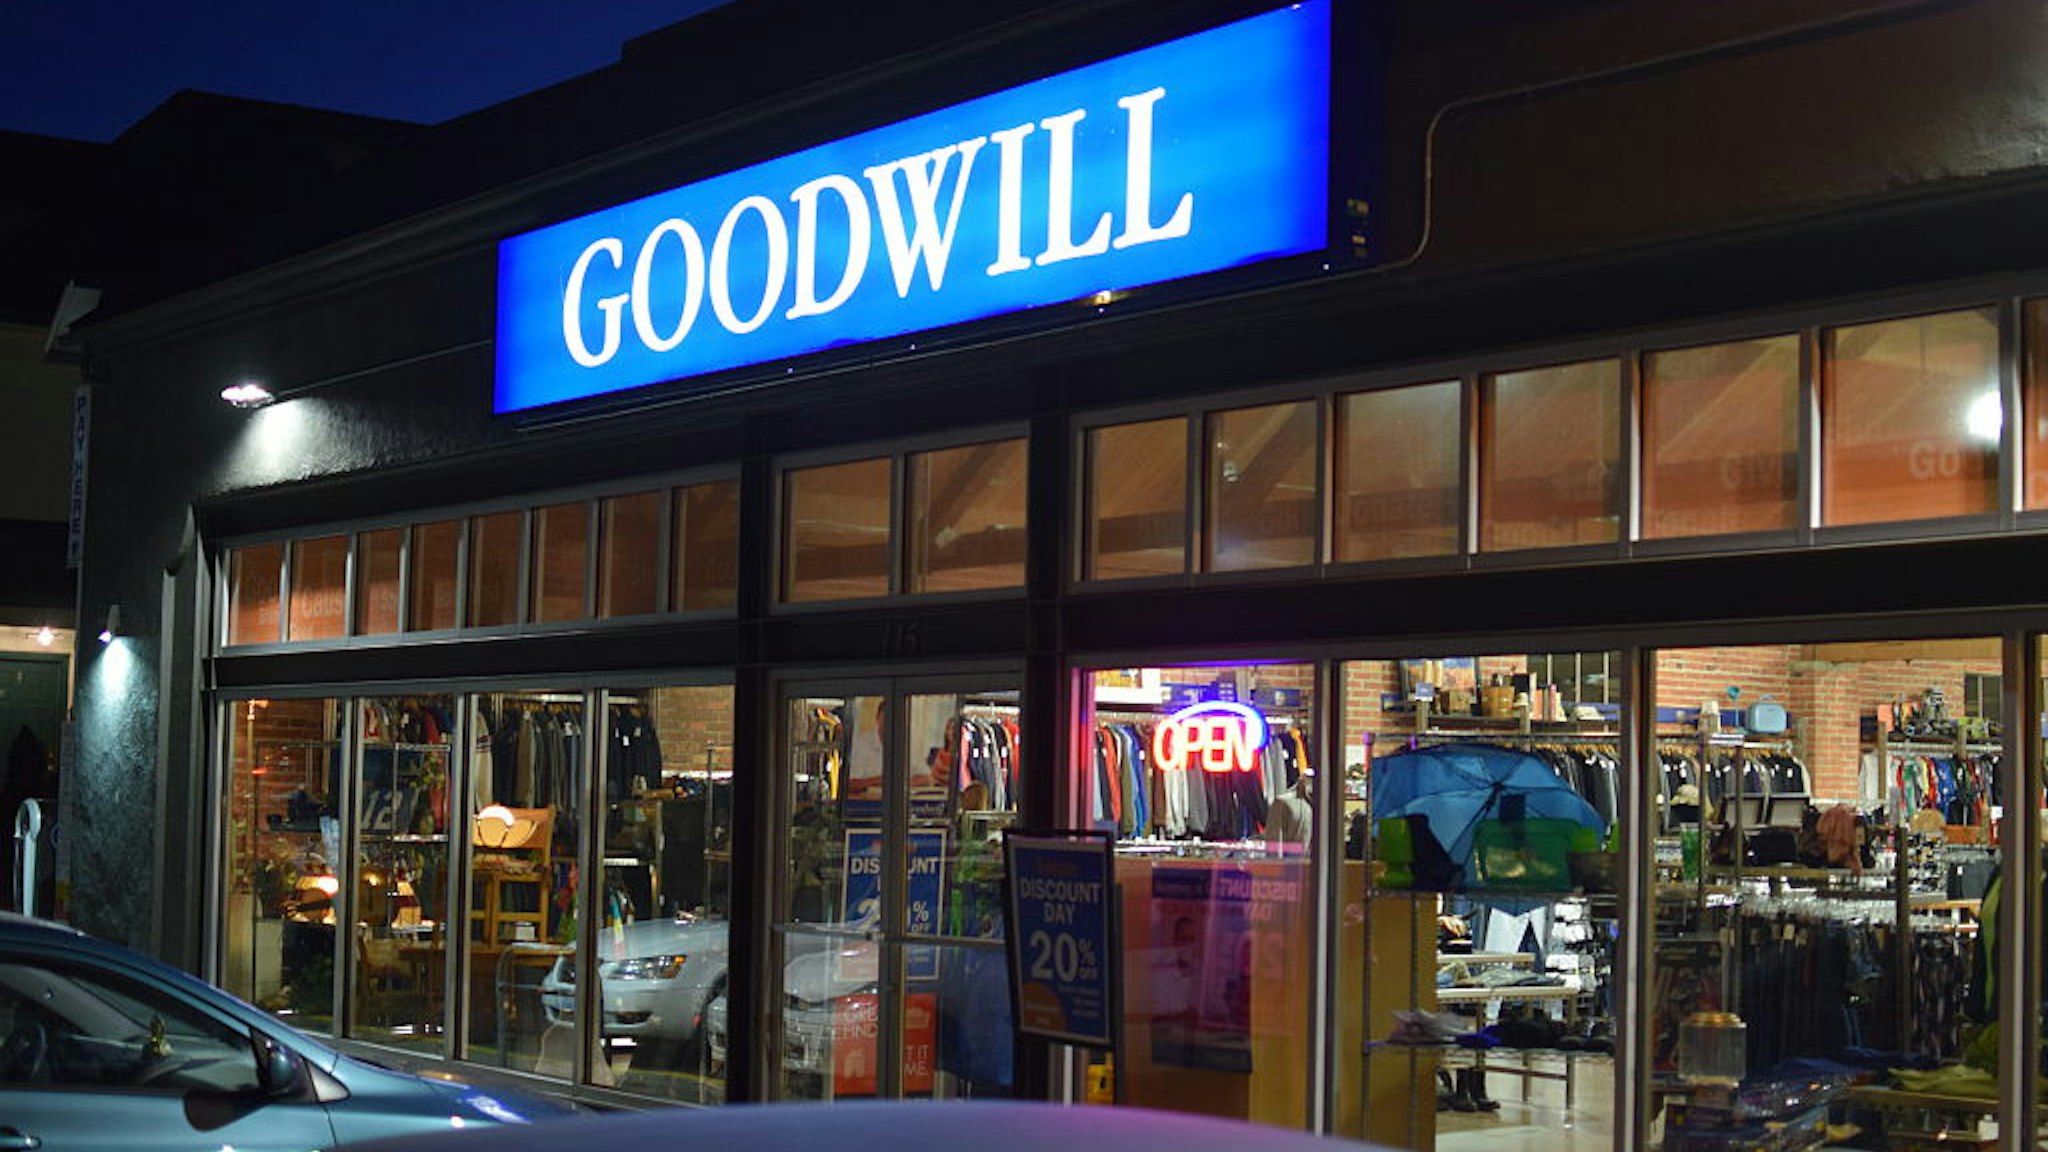 A Goodwill retail store front in the Capitol Hill neighborhood of Seattle, Washington. Cars are parked outside and thrift goods are seen through the windows of this urban location.